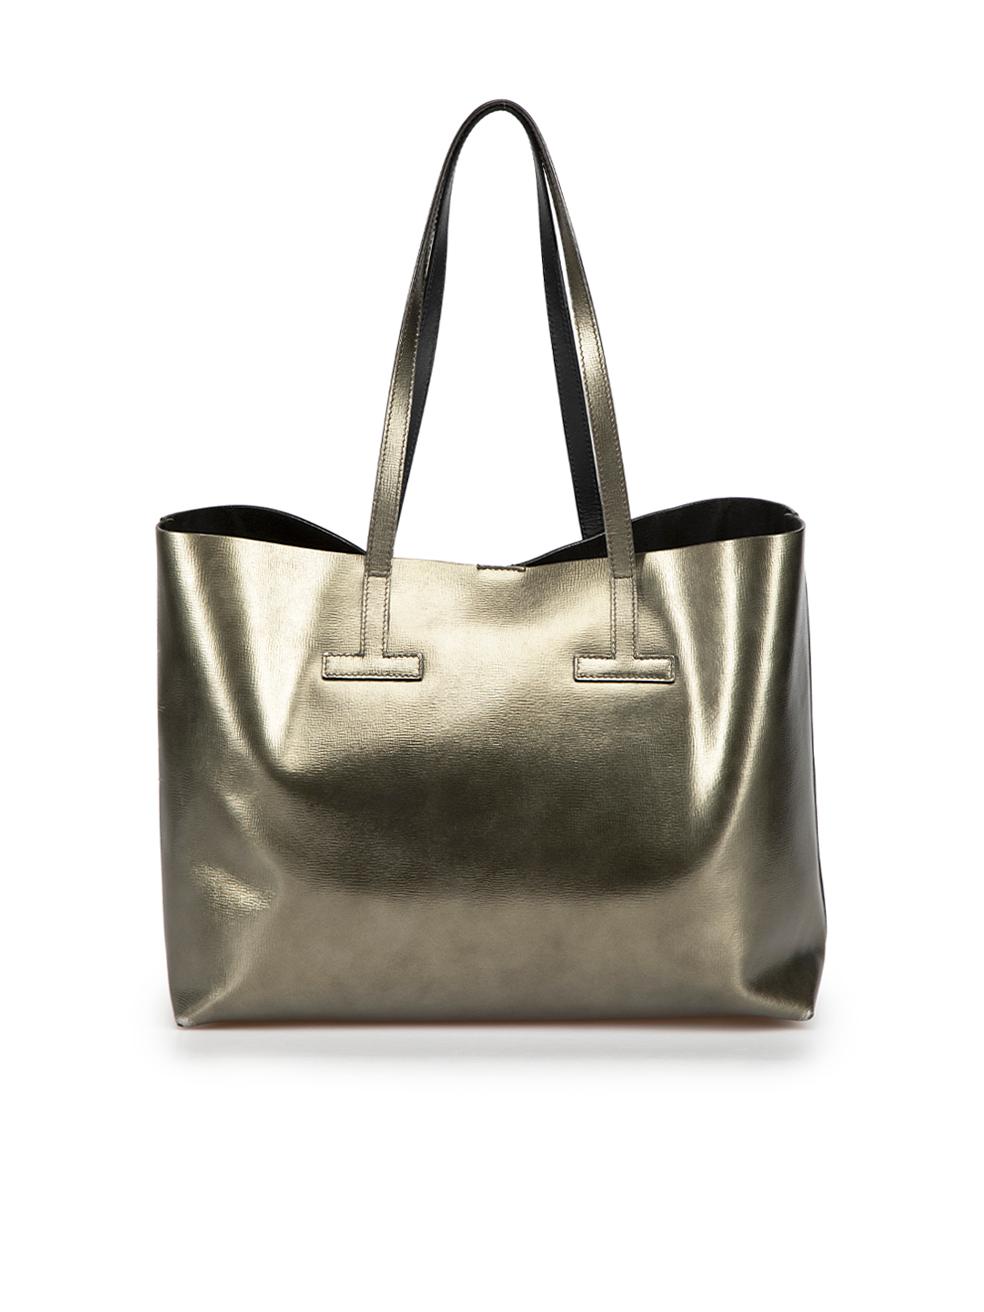 Gray Tom Ford Metallic Leather Saffiano T Tote Bag For Sale